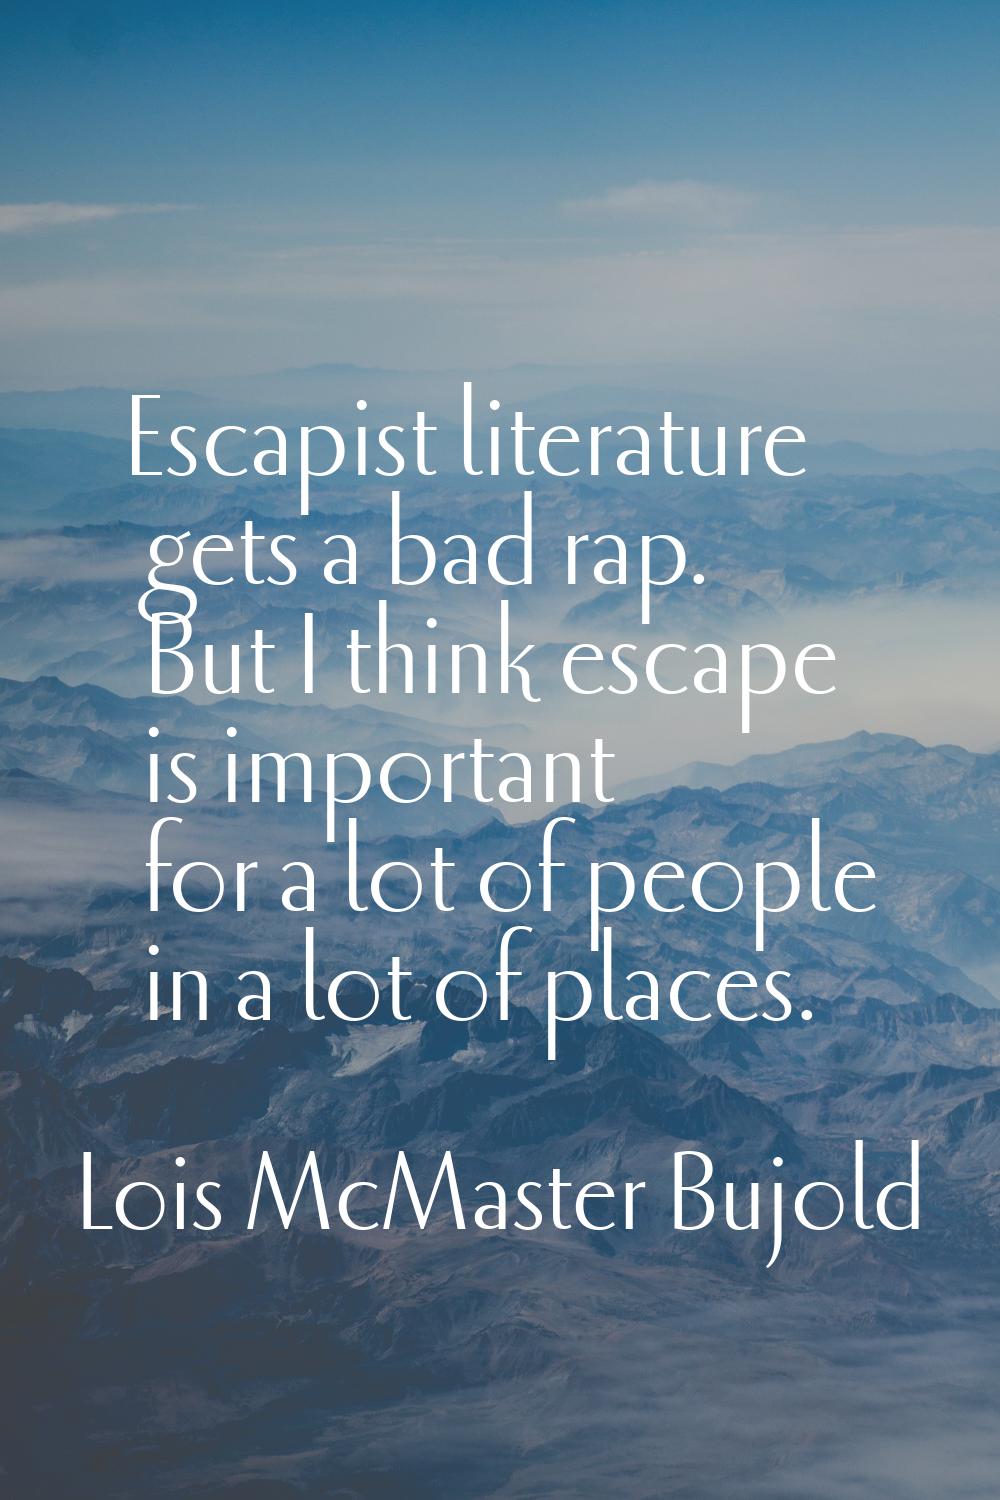 Escapist literature gets a bad rap. But I think escape is important for a lot of people in a lot of